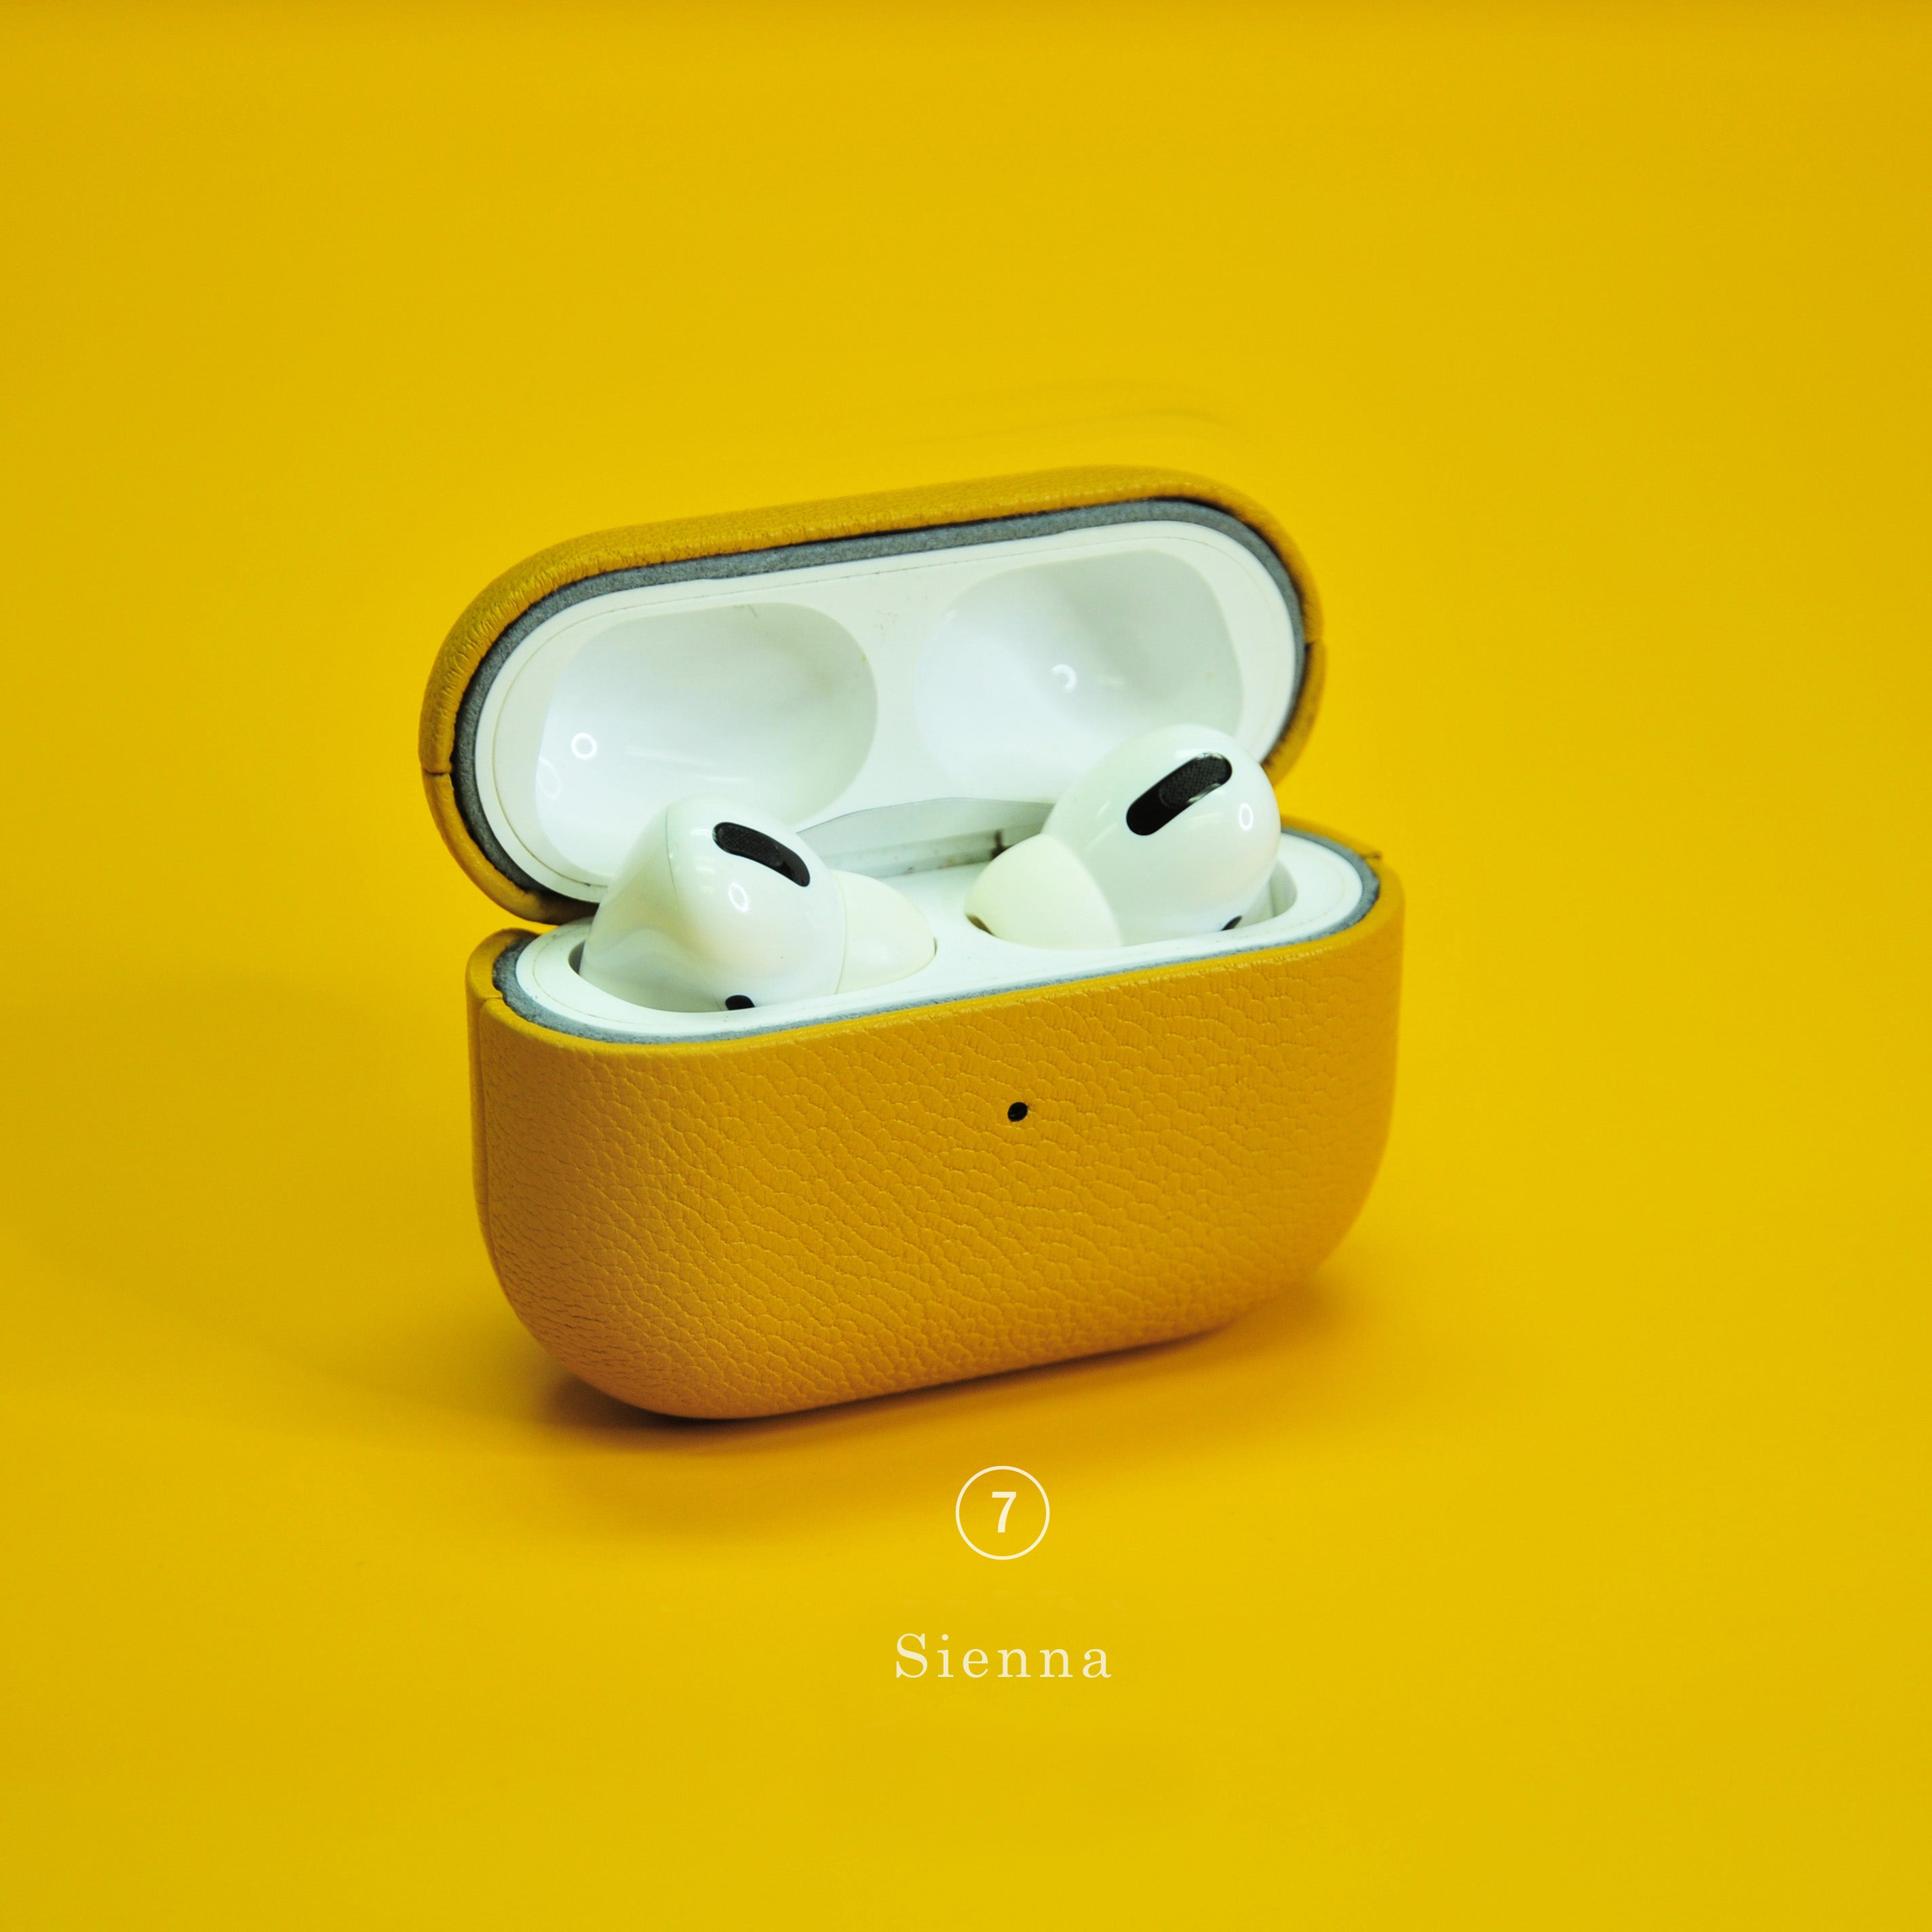 Sienna Leather AirPod Case